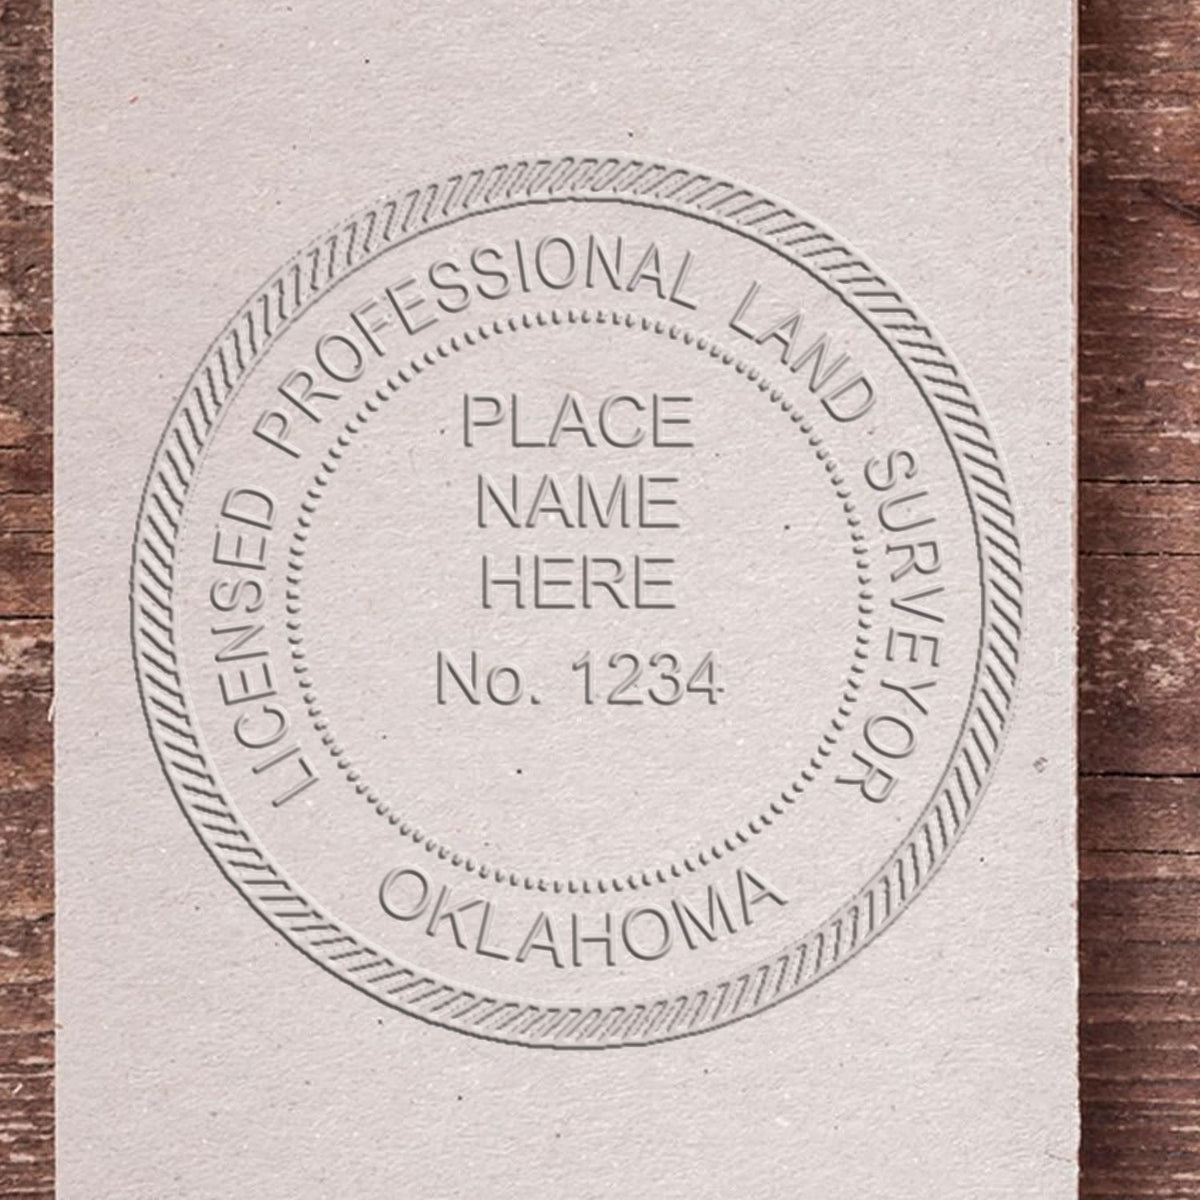 A photograph of the Hybrid Oklahoma Land Surveyor Seal stamp impression reveals a vivid, professional image of the on paper.